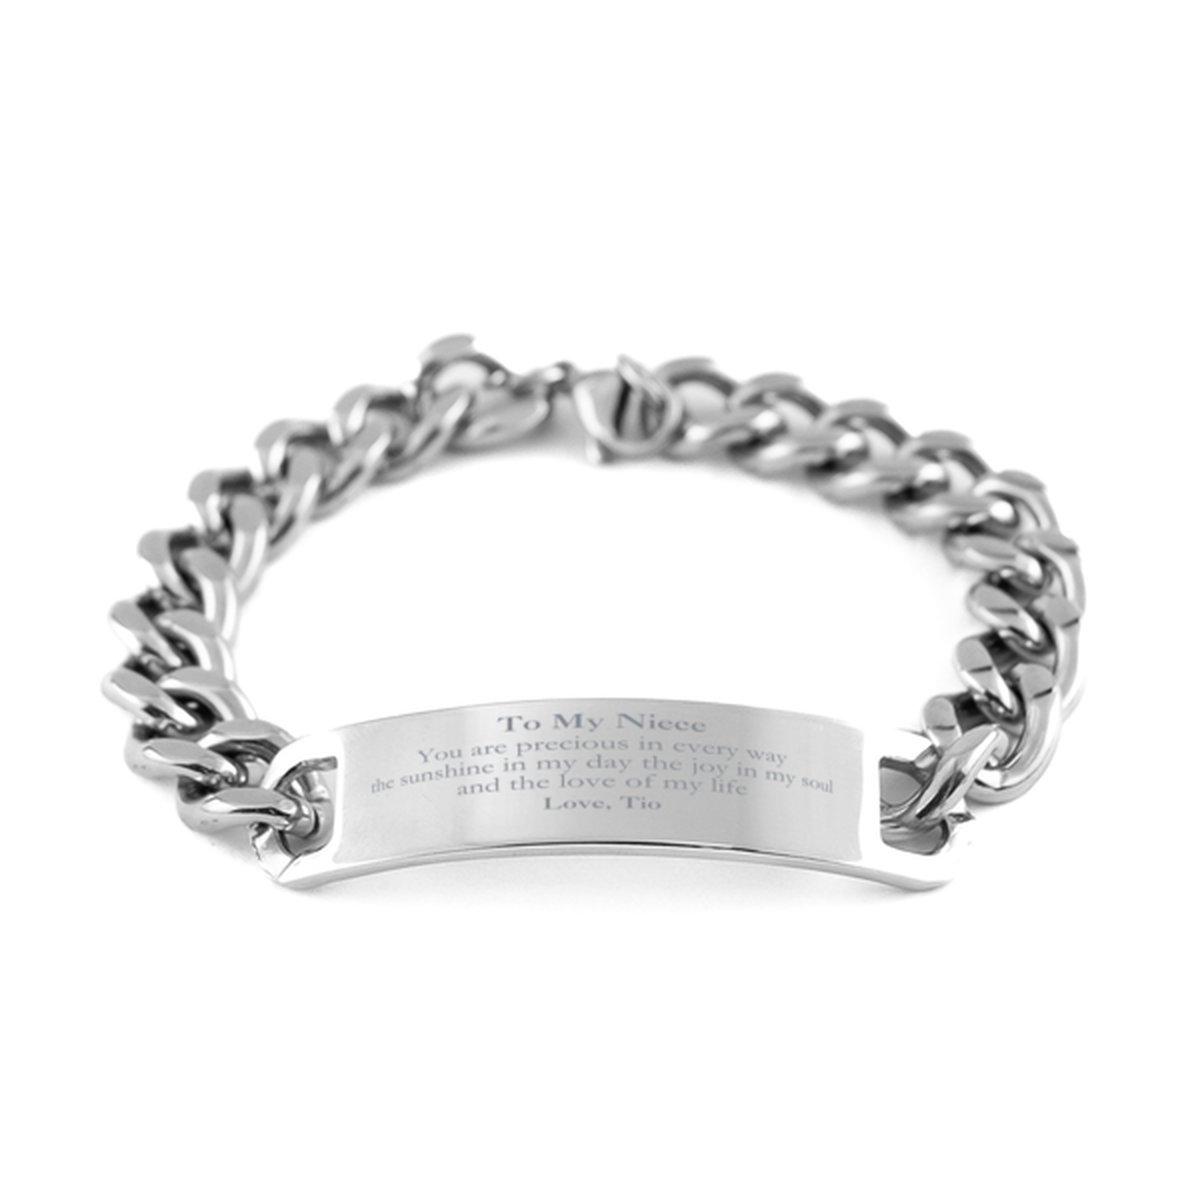 Graduation Gifts for Niece Cuban Chain Stainless Steel Bracelet Present from Tio, Christmas Niece Birthday Gifts Niece You are precious in every way the sunshine in my day. Love, Tio